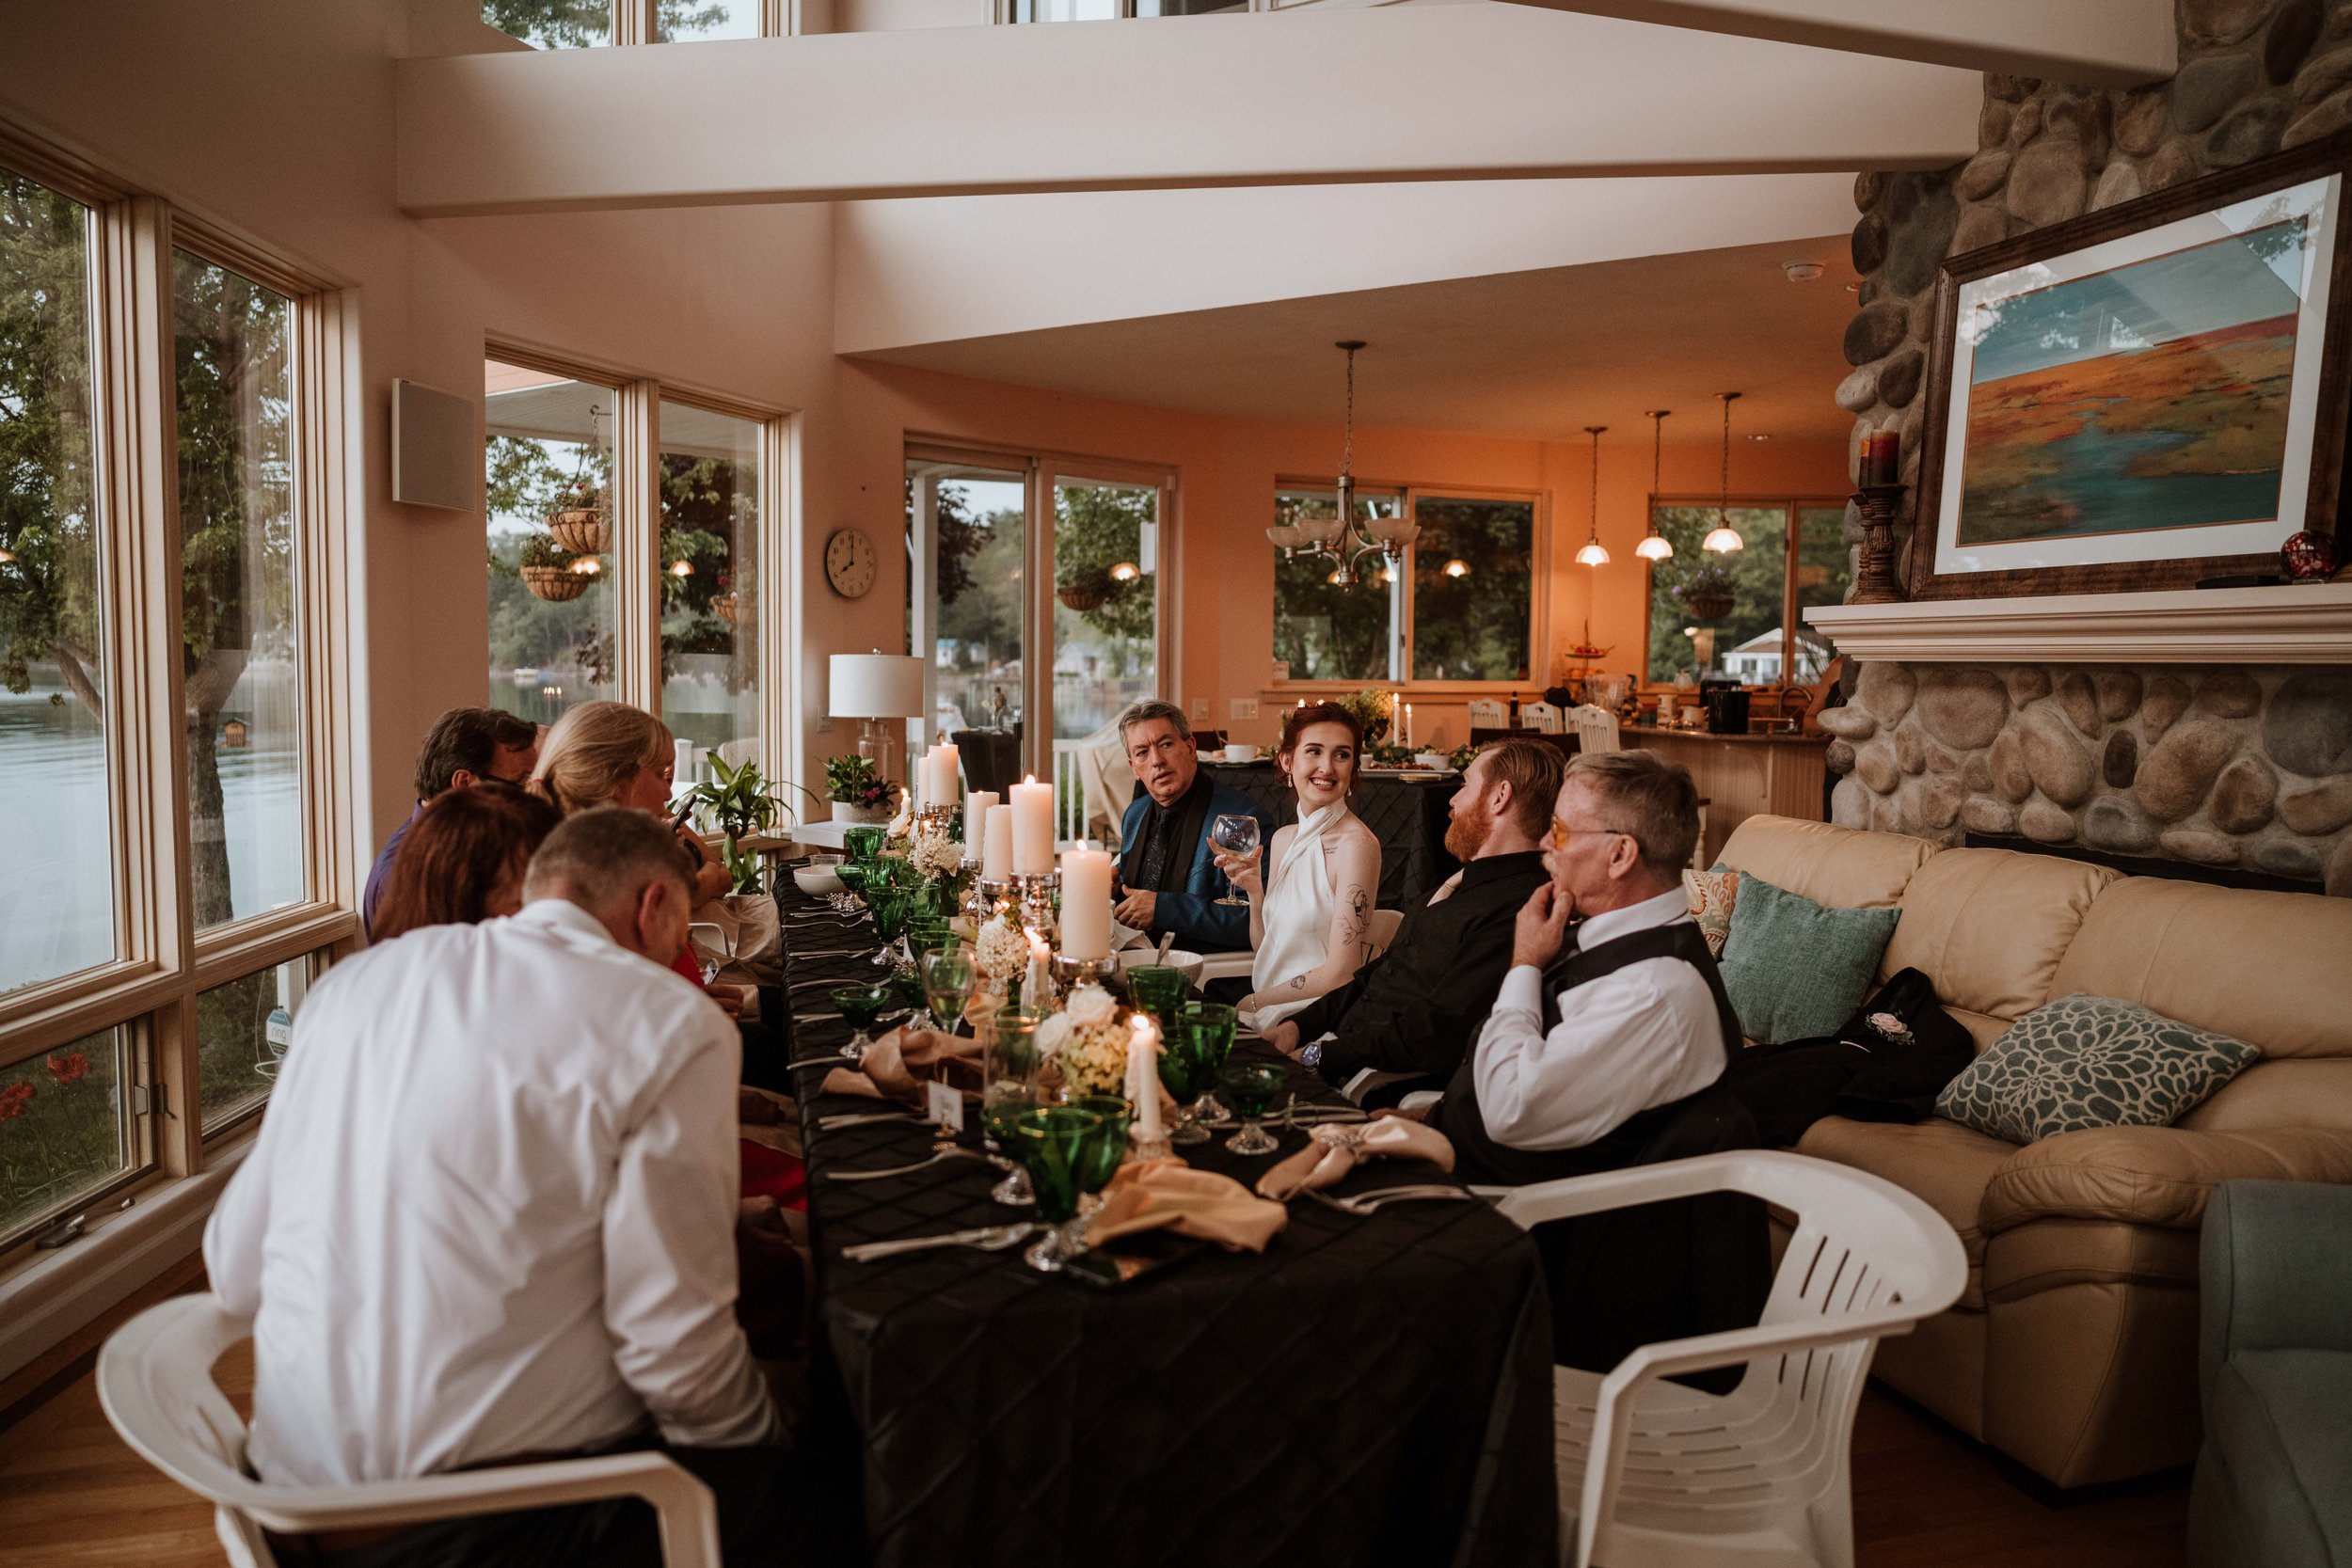 An elopement dinner with 10 guests in the newlywed couples' family home.